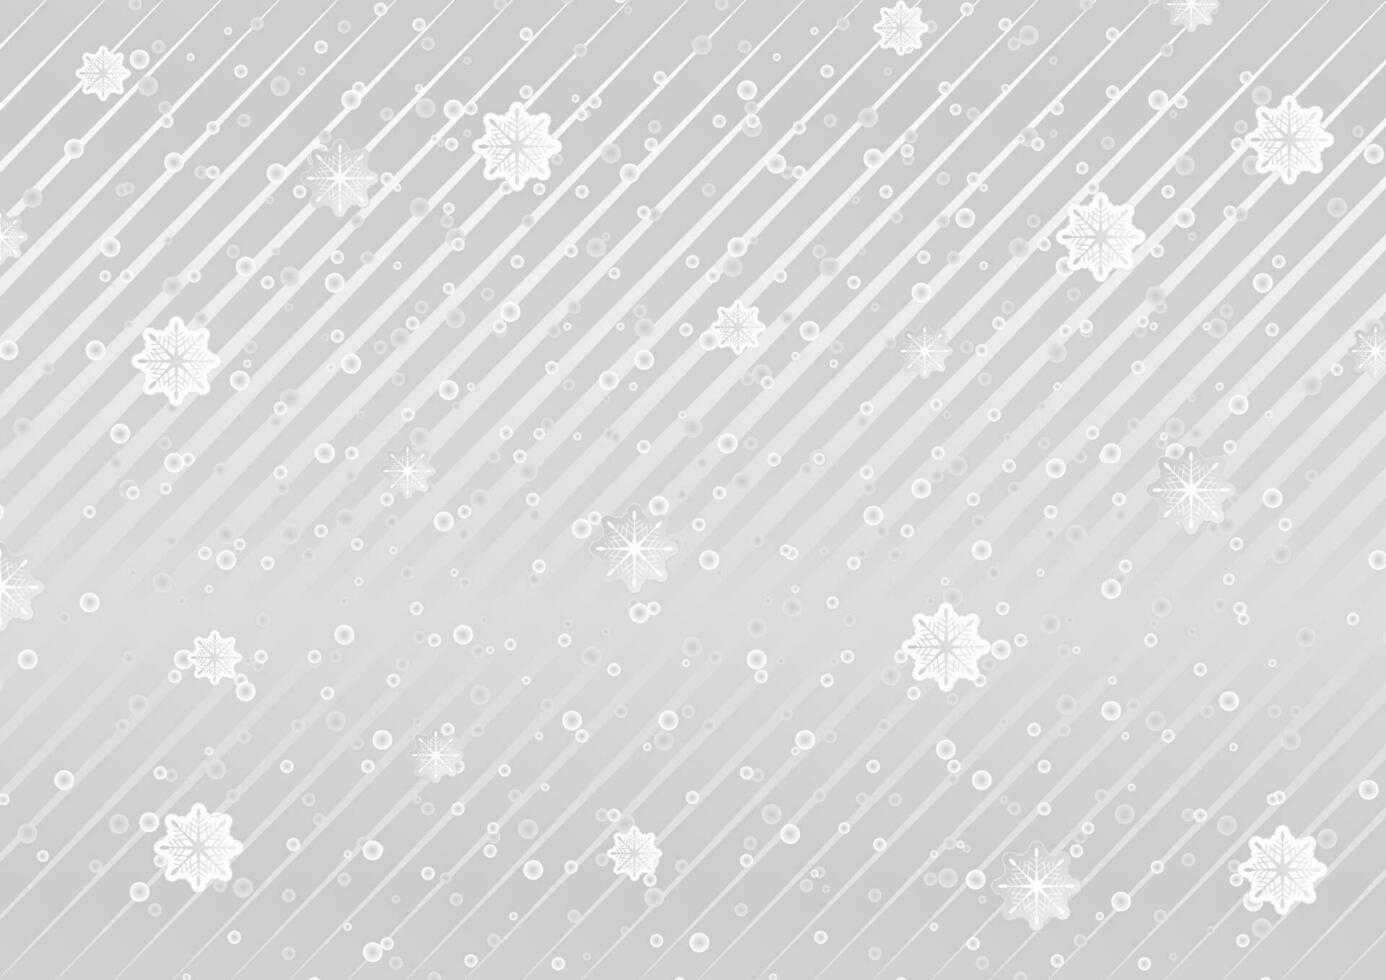 Grey and white stripes and snowflakes abstract background vector